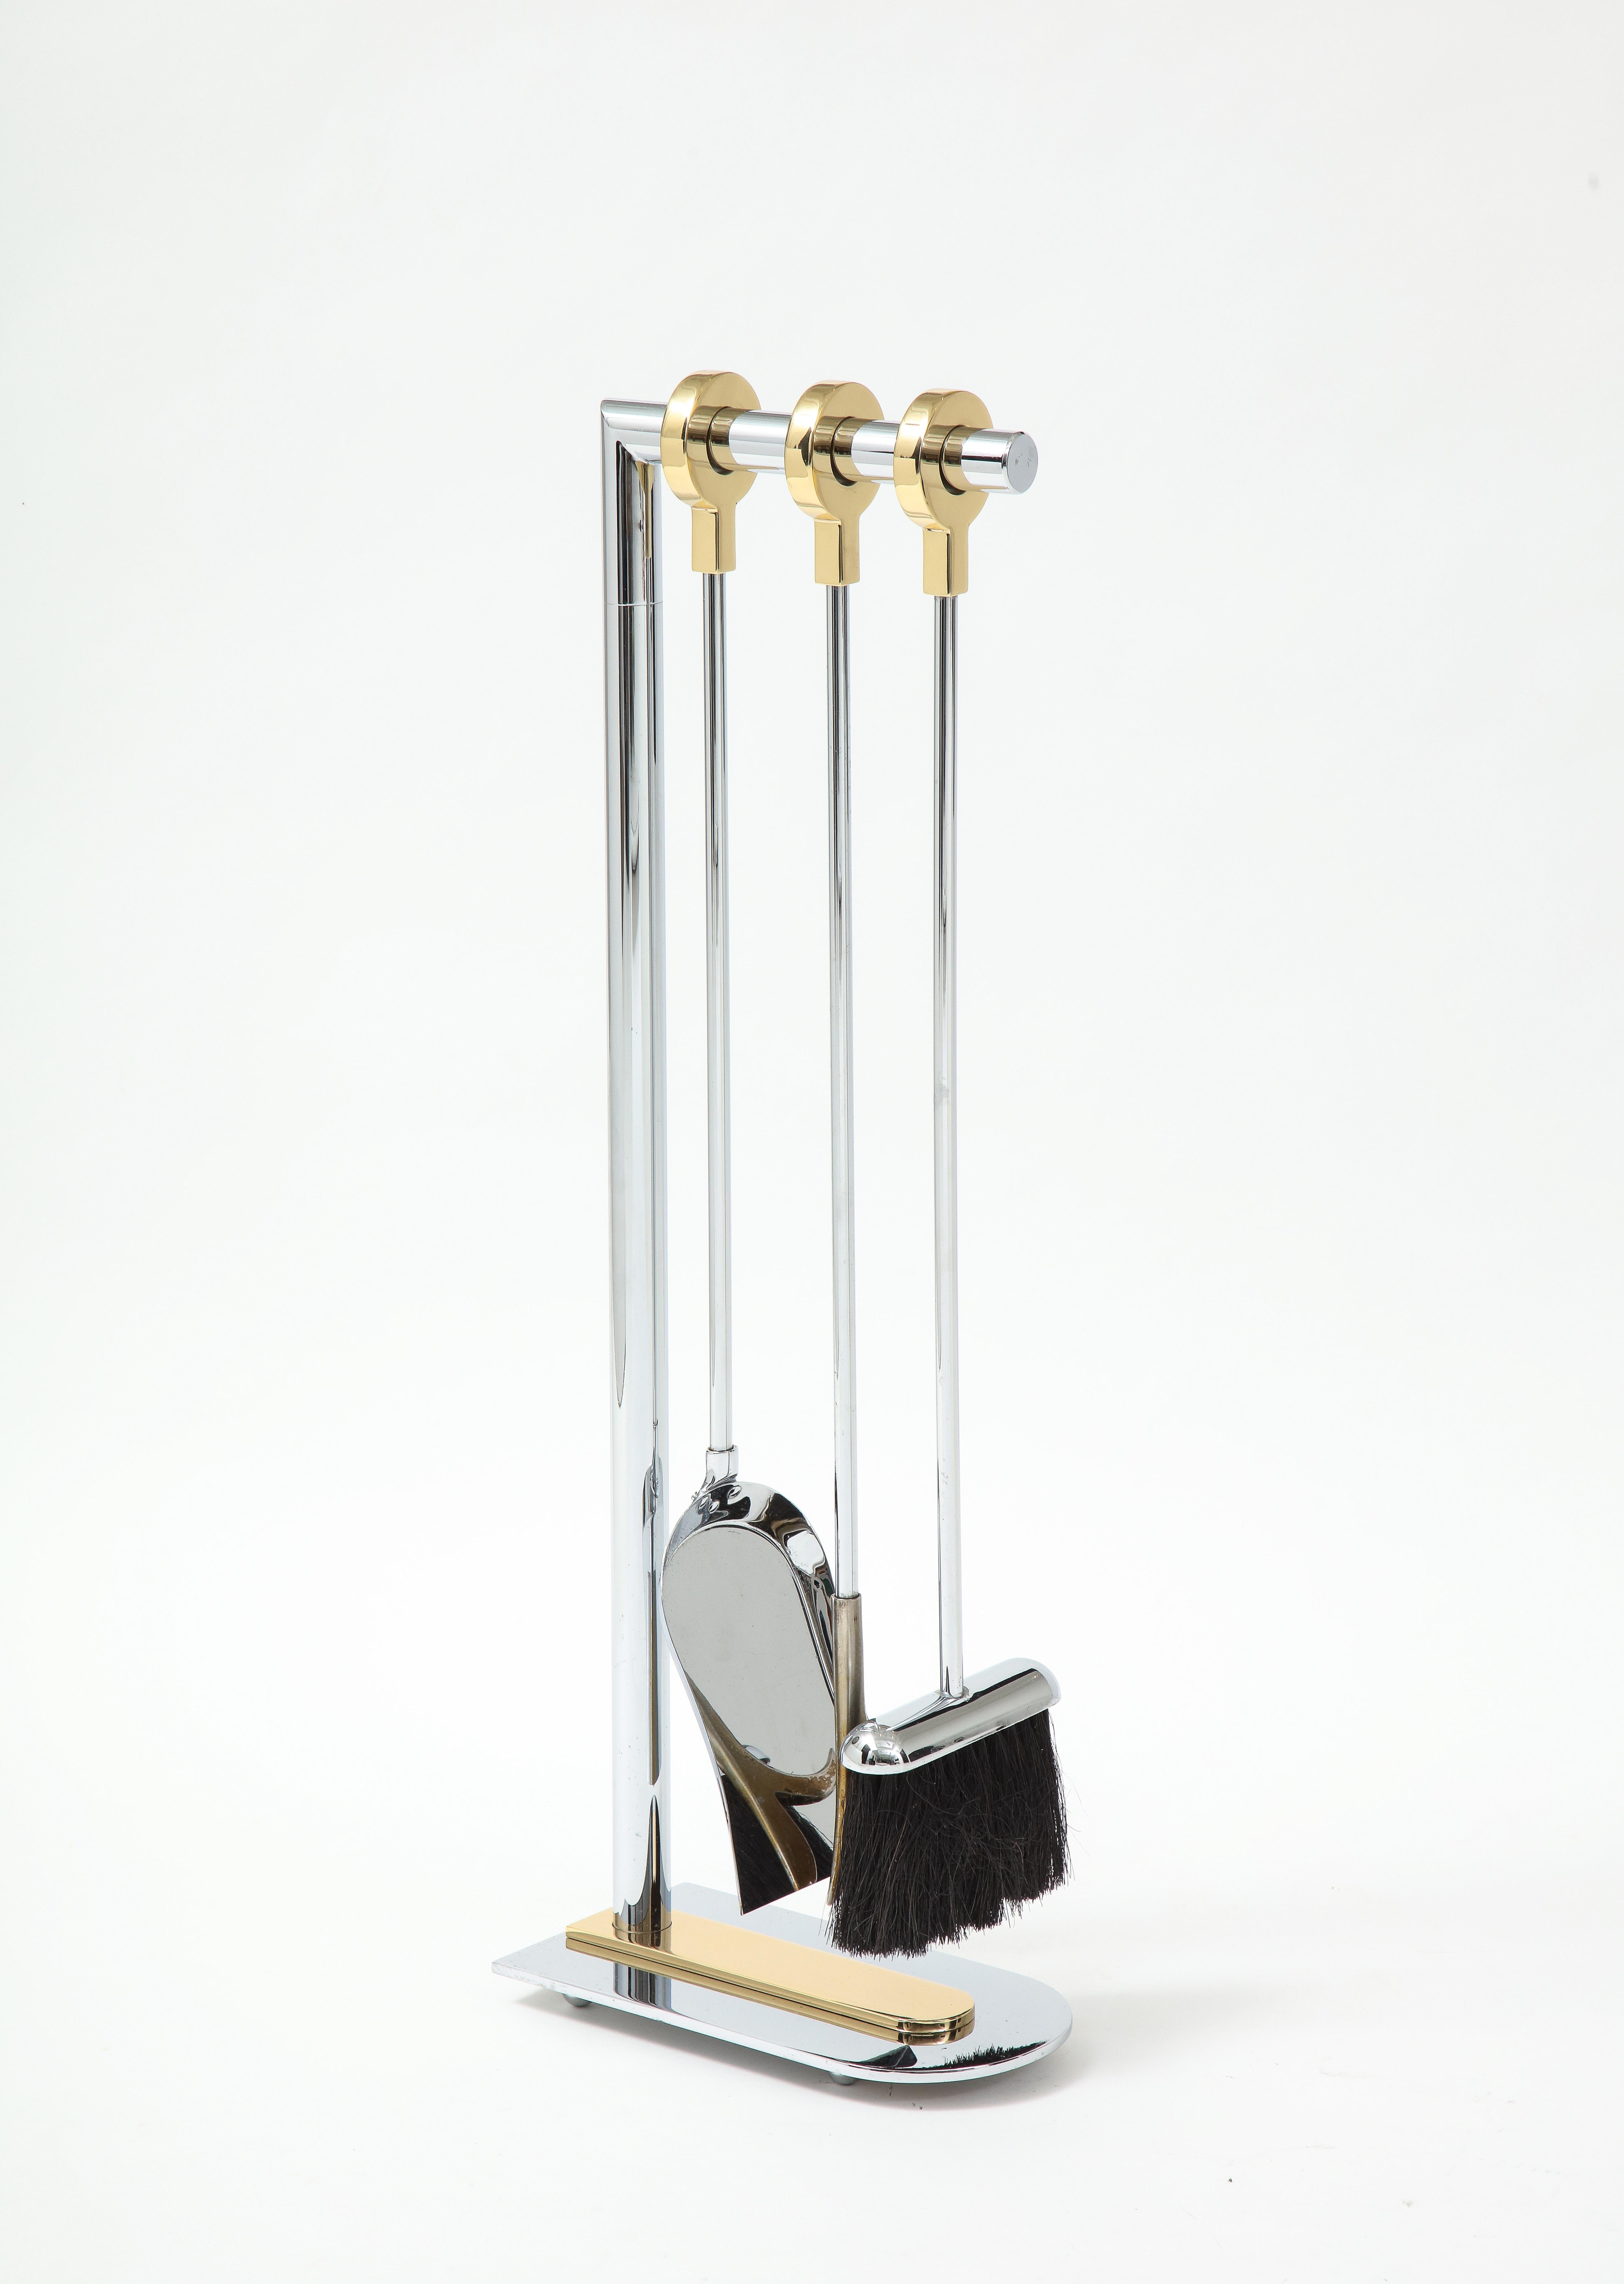 Modernist set of polished steel firetools with open brass ring finials and brass base plate. Professionally polished.